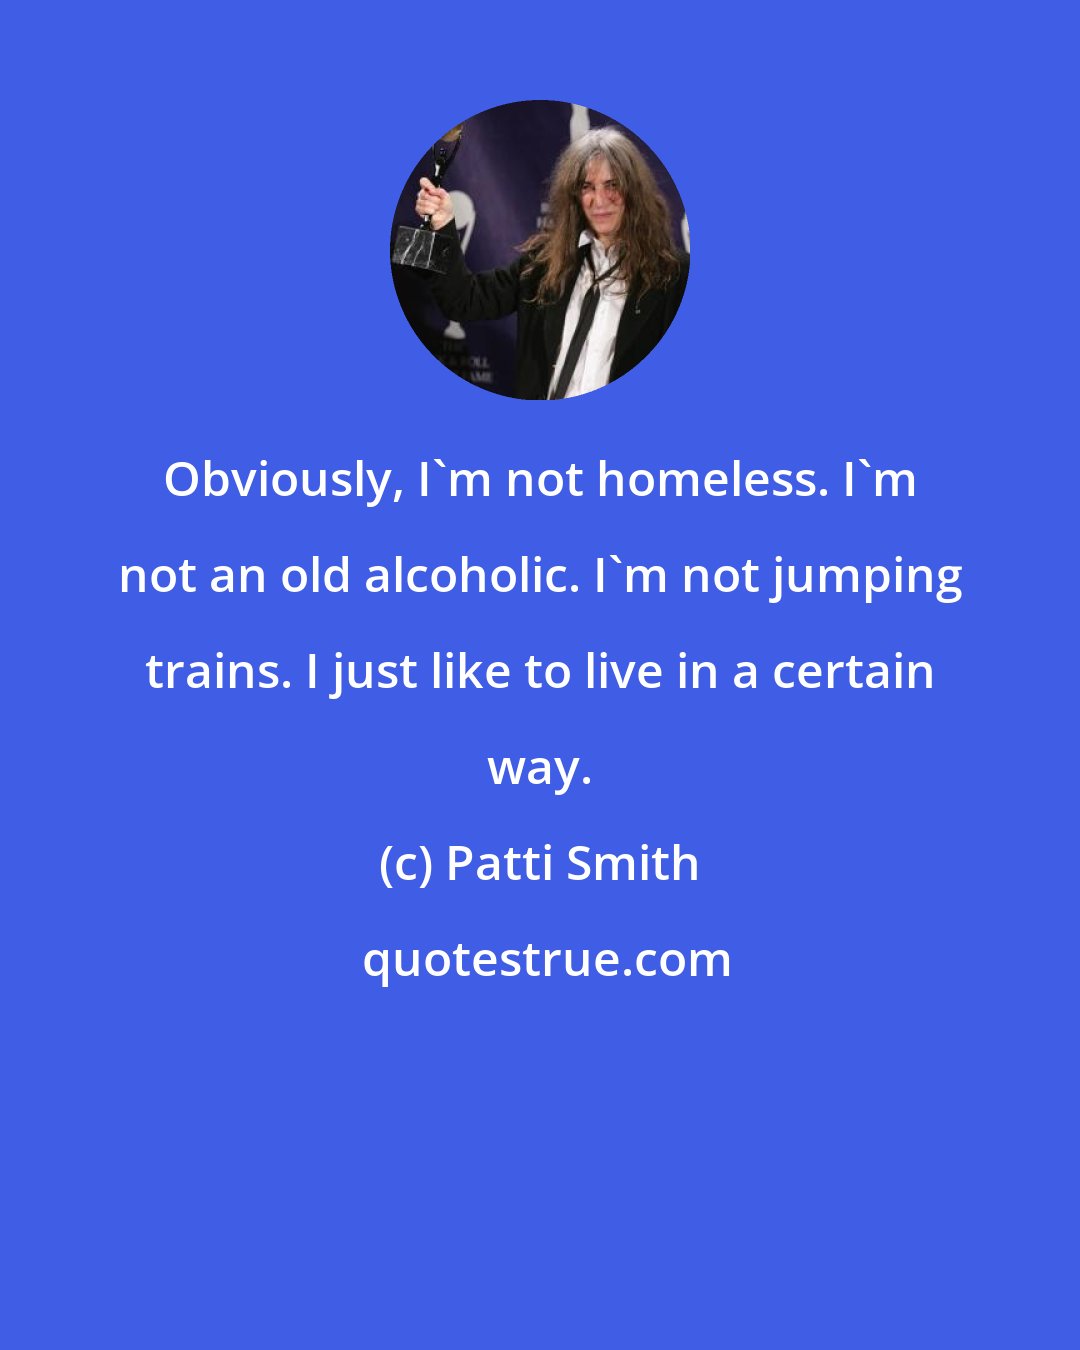 Patti Smith: Obviously, I'm not homeless. I'm not an old alcoholic. I'm not jumping trains. I just like to live in a certain way.